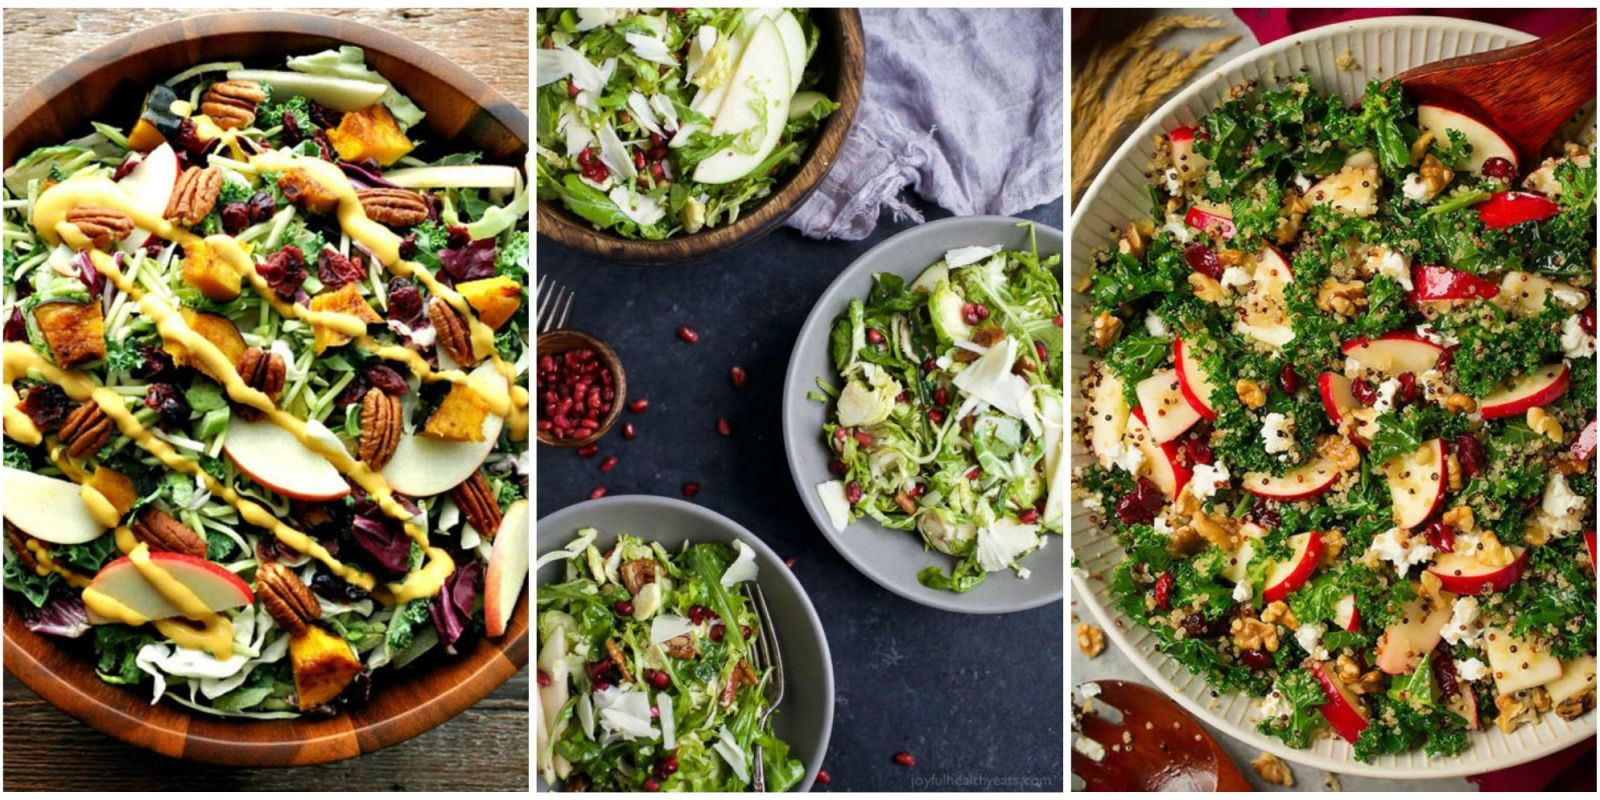 Salads For Thanksgiving Dinner
 11 Easy Thanksgiving Salad Recipes Best Side Salads for